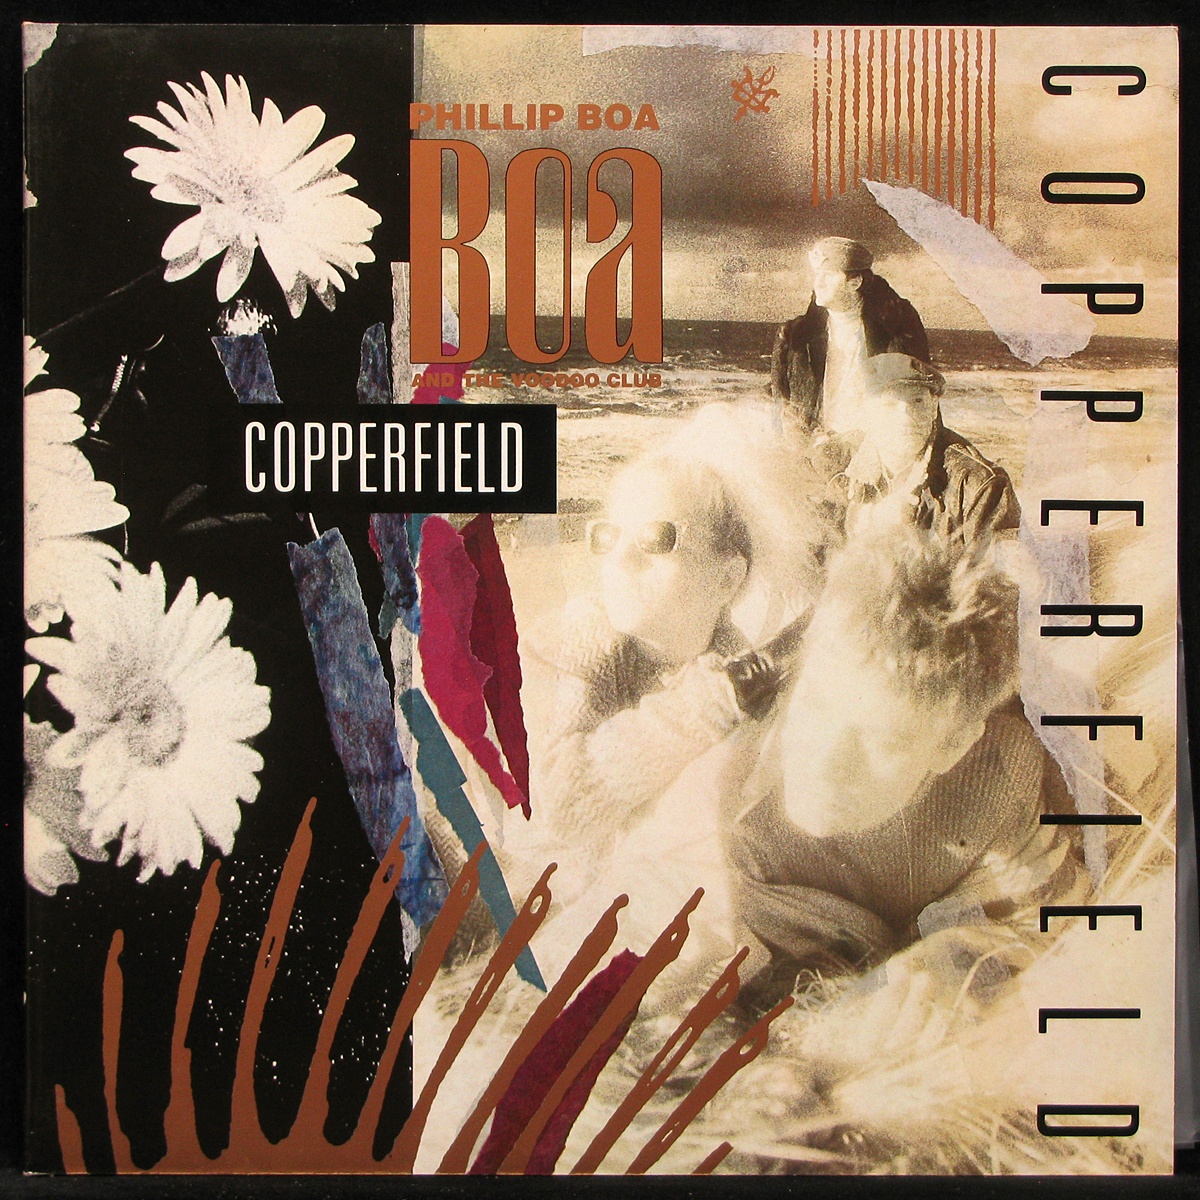 LP Phillip Boa And The Voodoo Club — Copperfield (LP + maxi) фото